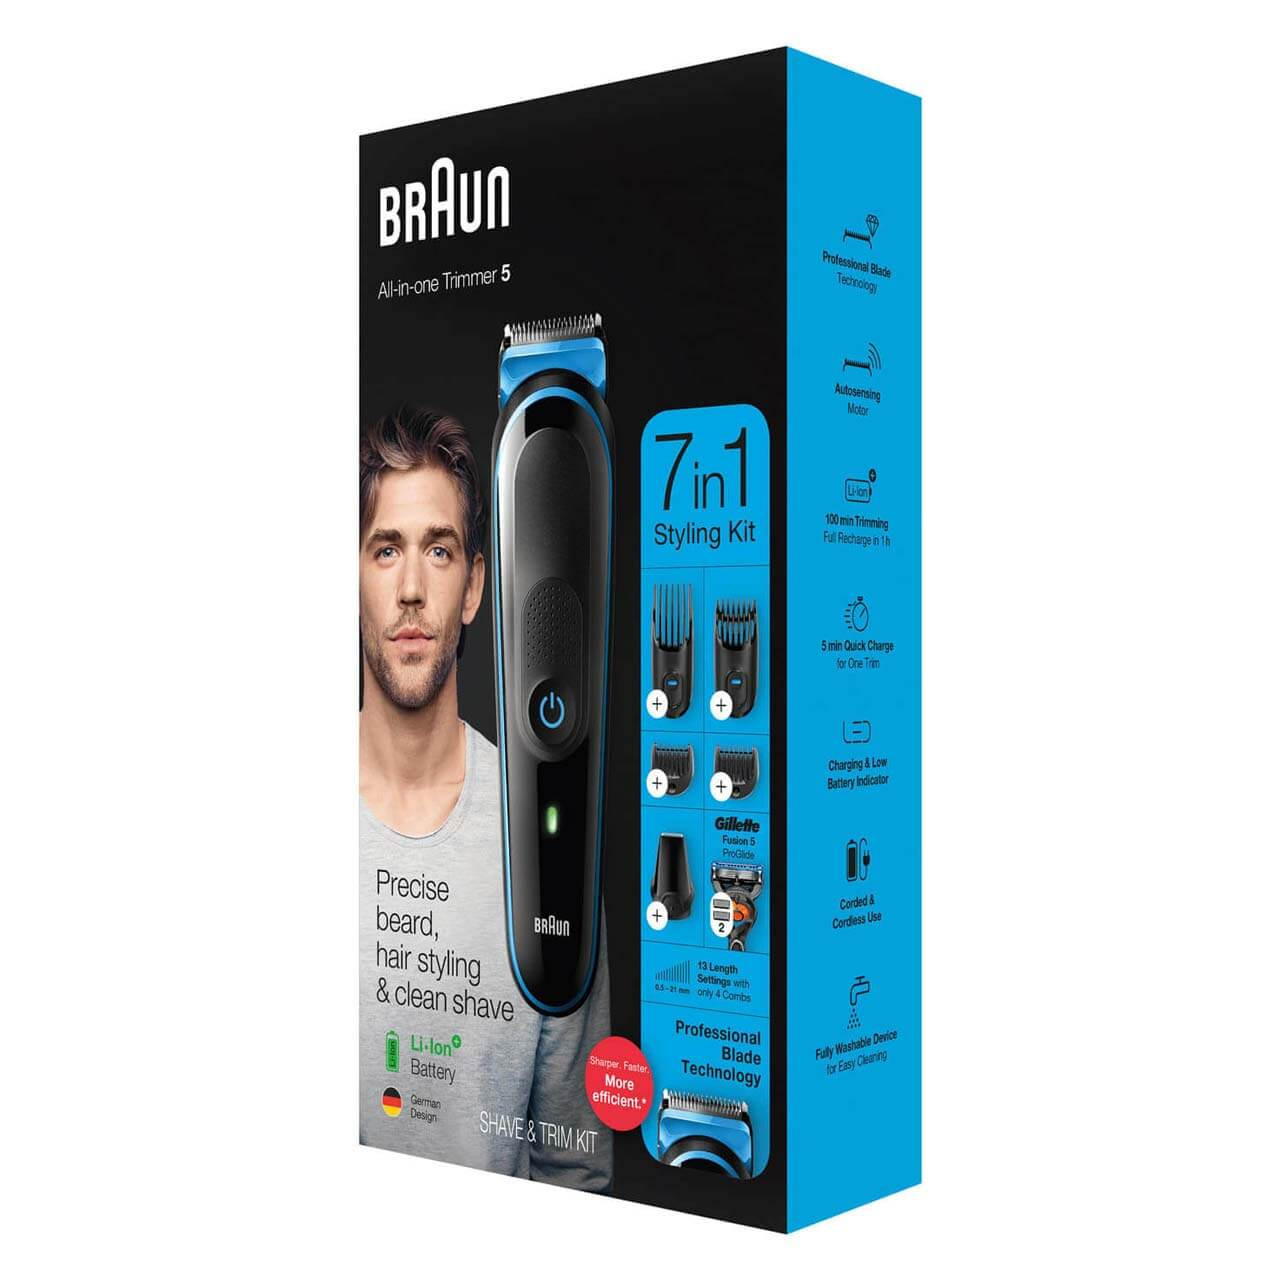 https://cdn11.bigcommerce.com/s-61qnoipi5/images/stencil/1280x1280/products/153/601/6-Braun-allinone-mgk5245-7in1-blue-packaging-productimage-1280x1280__33574.1616189765.jpg?c=2